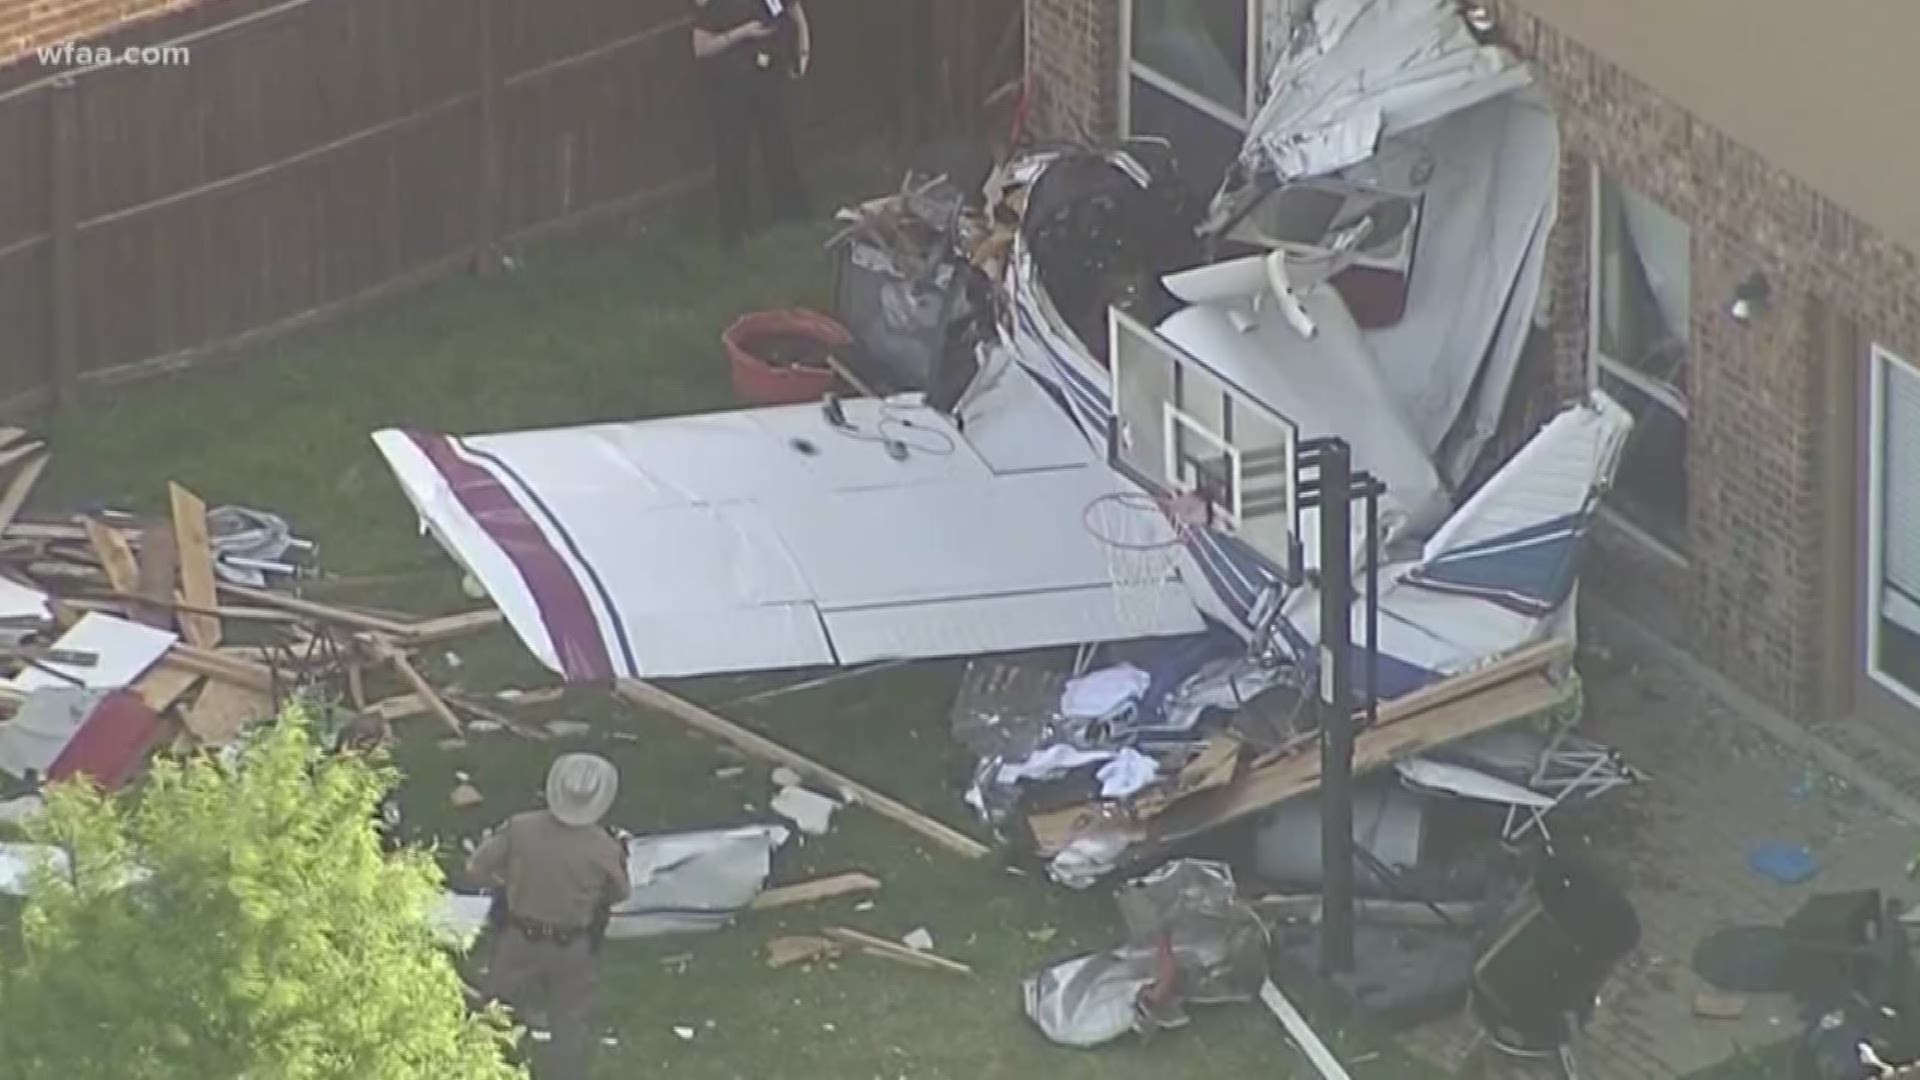 A family hopes they can soon return to their McKinney home after a plane crashed into their backyard Thursday.